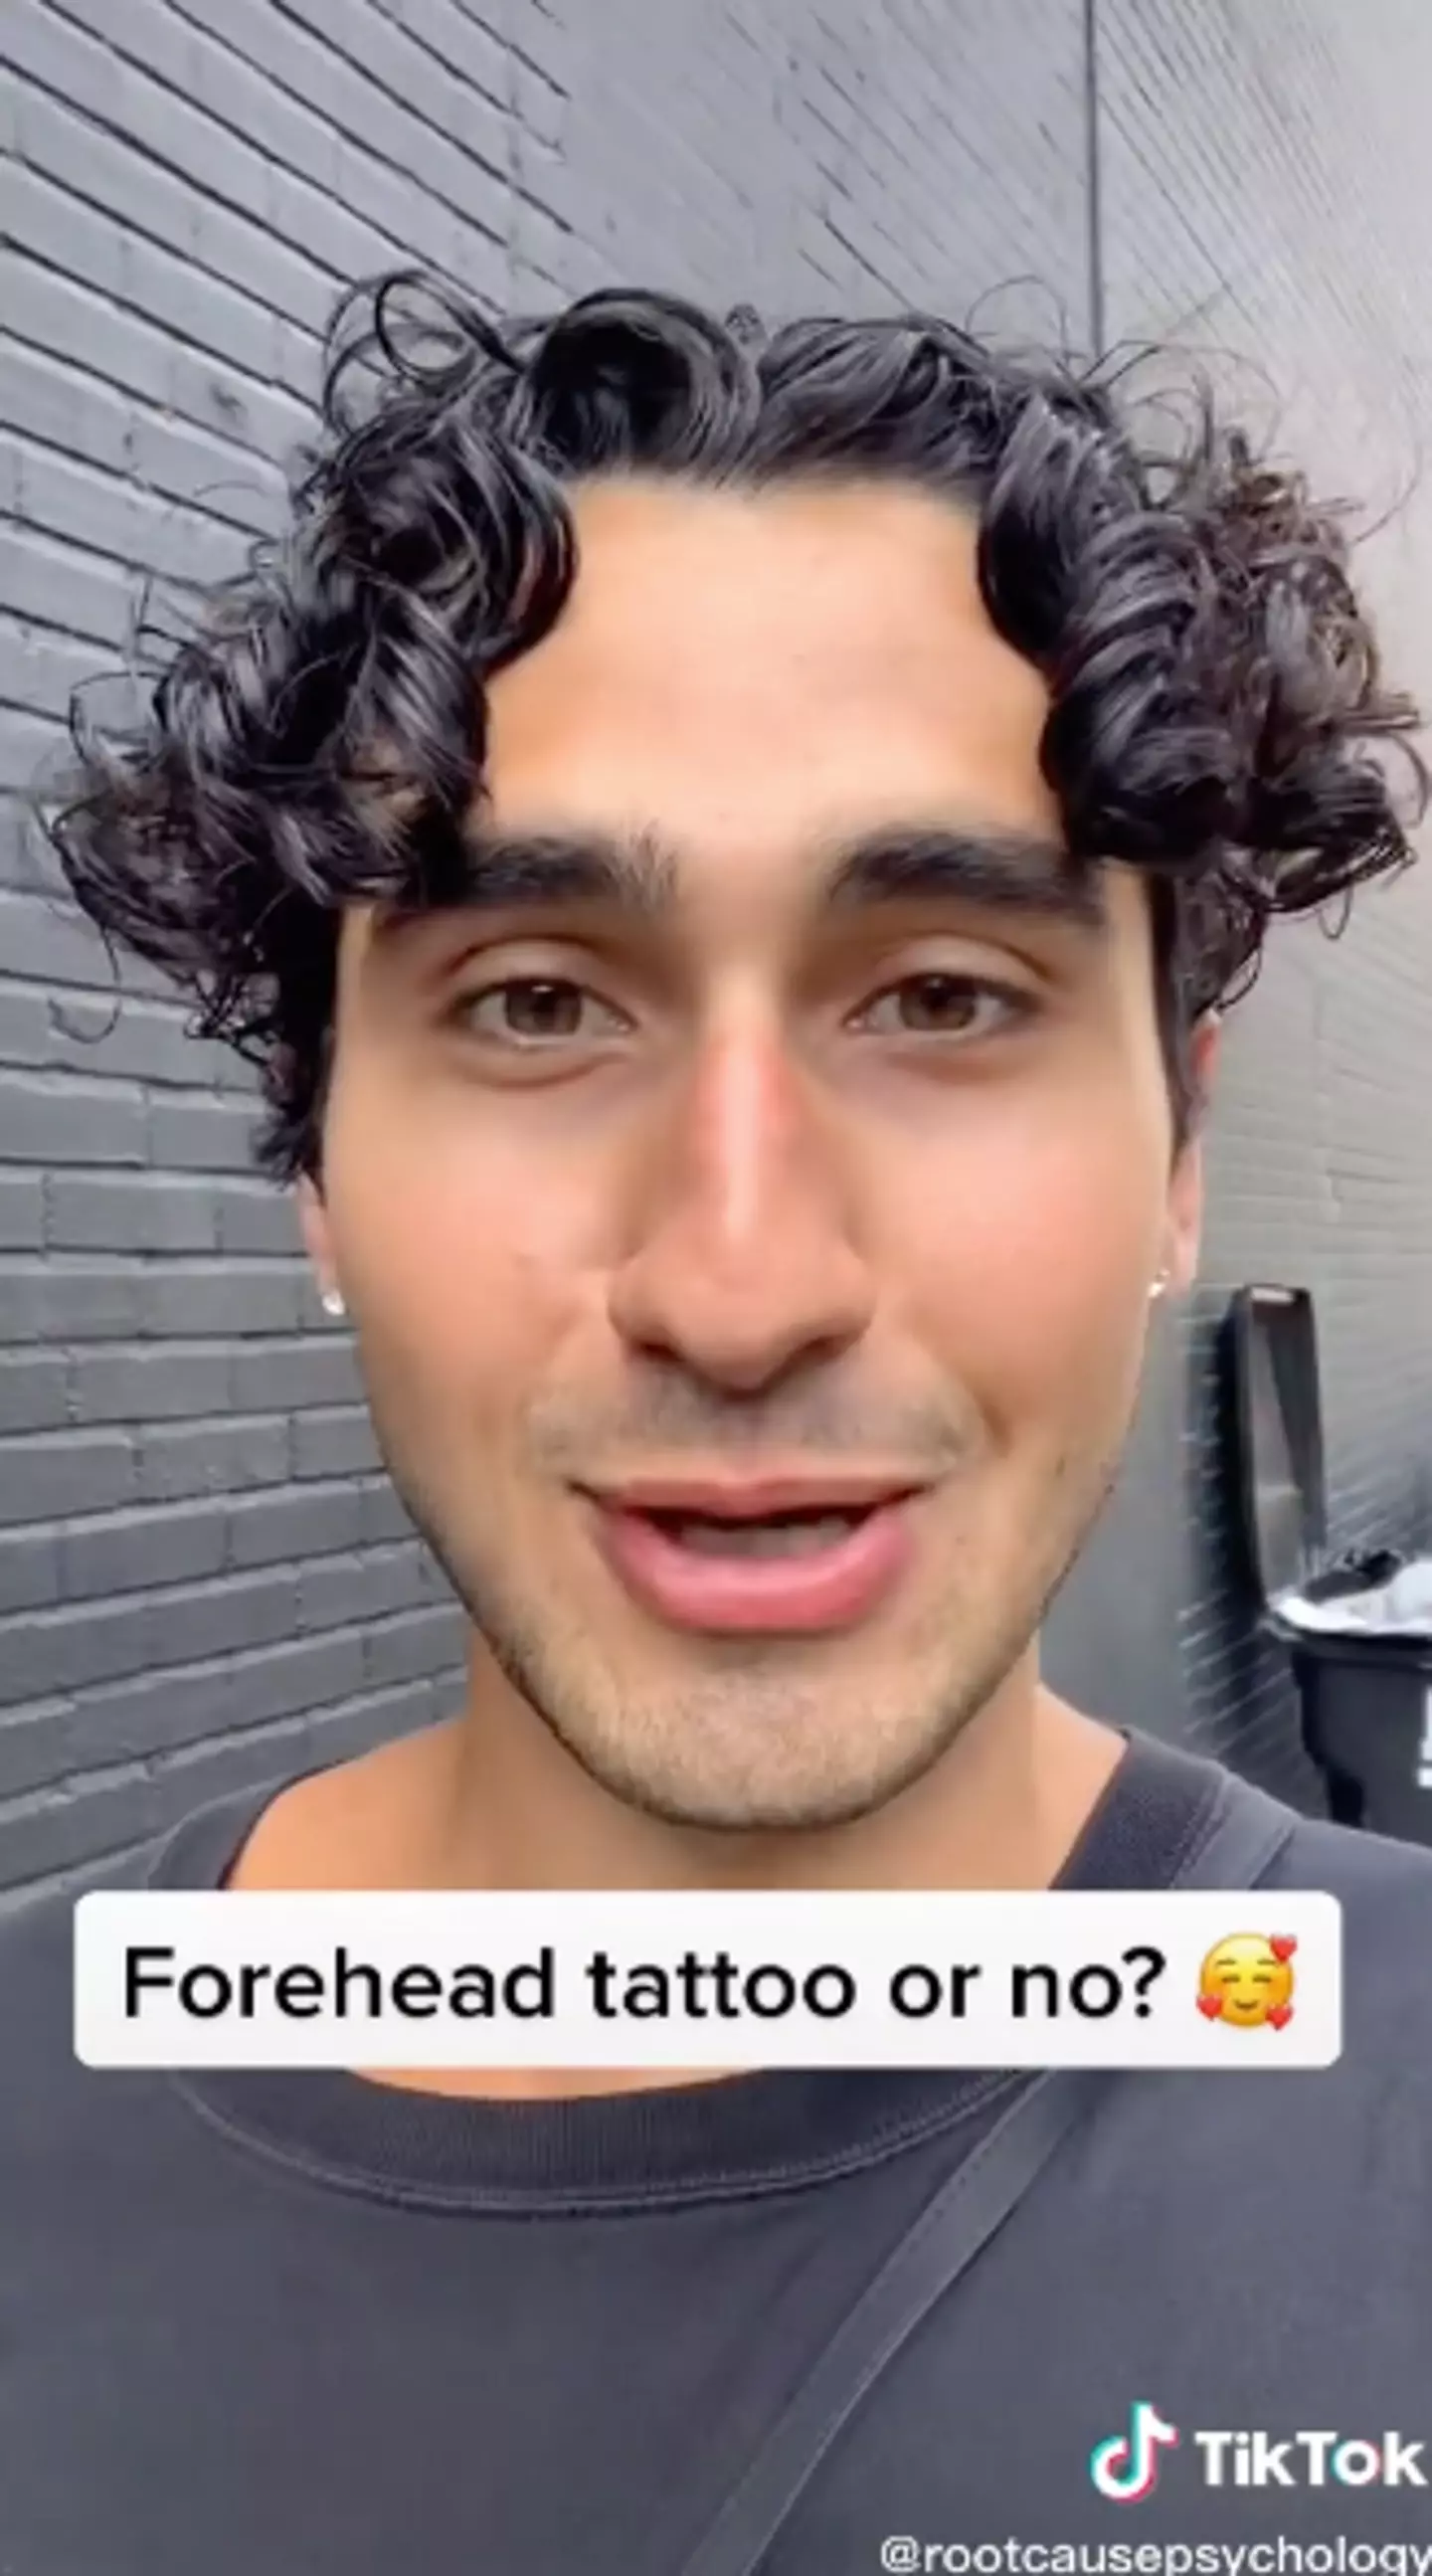 His video did not blow up, but he got inked anyway.